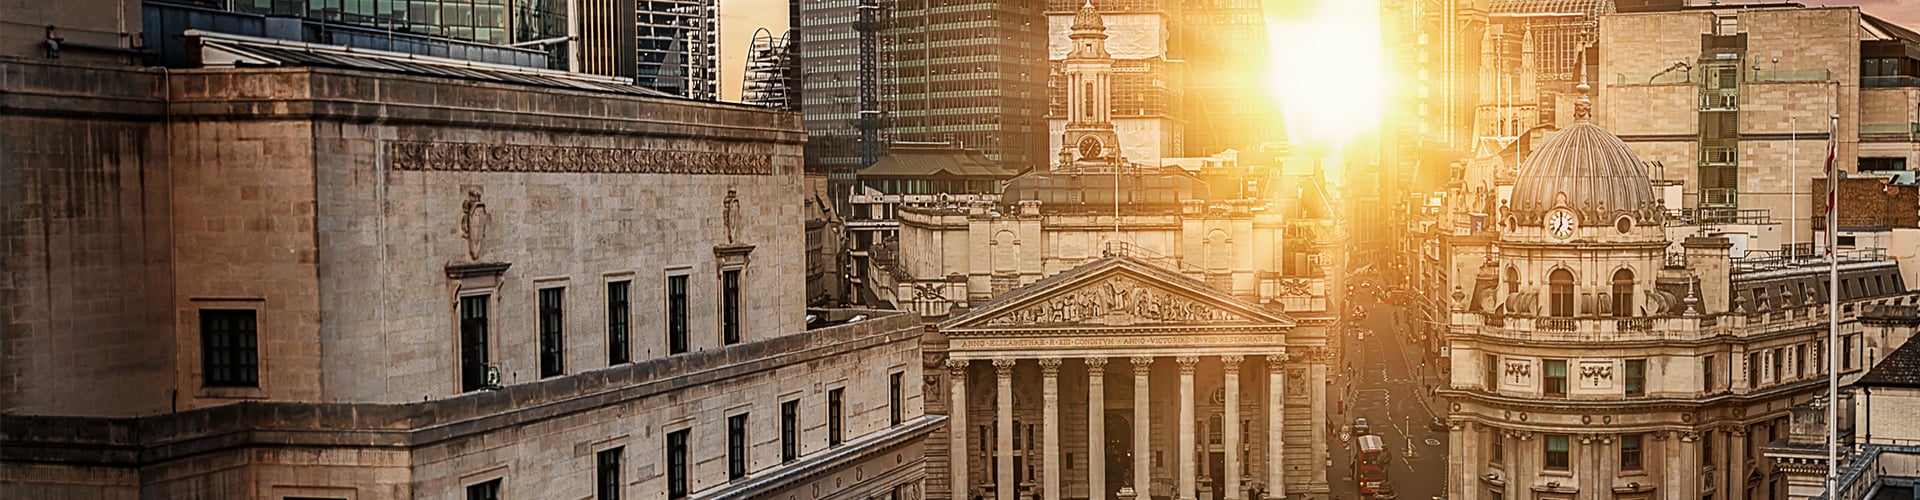 Sunset view of London Stock Exchange